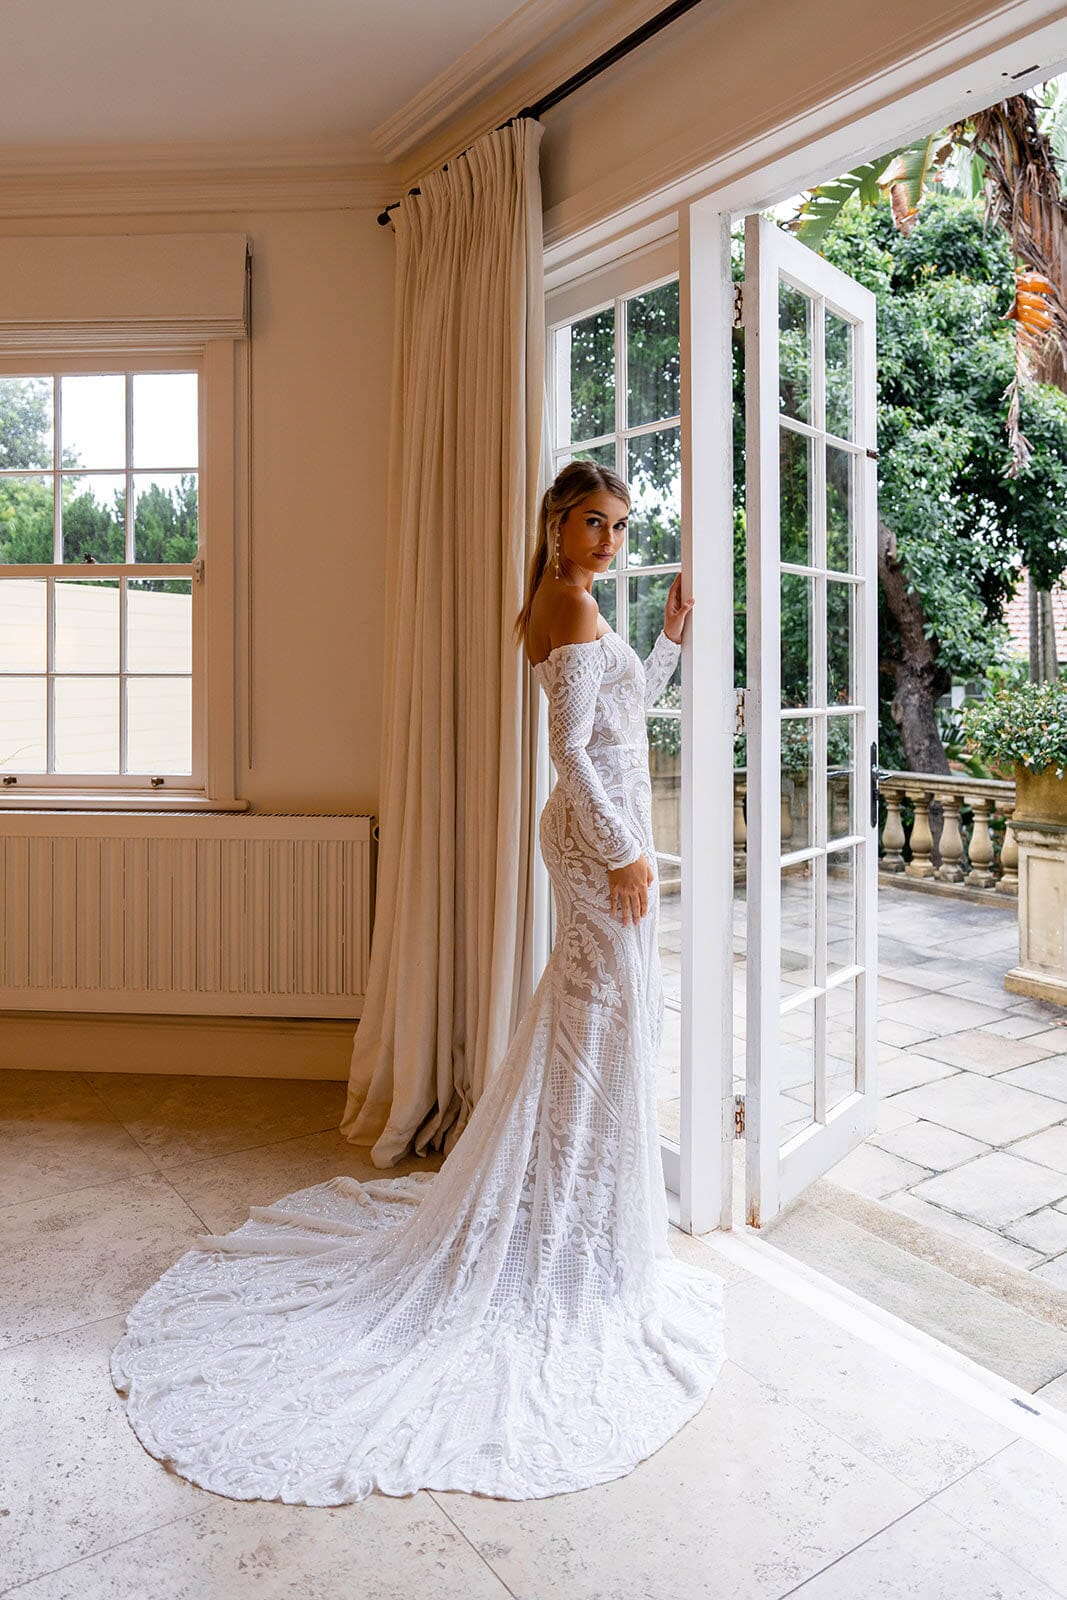 Moderate Sweep Train of Nude Illusion Fitted Wedding Dress with Off-Shoulder Long Sleeves in White Pattern Sequin and Nude Underlay